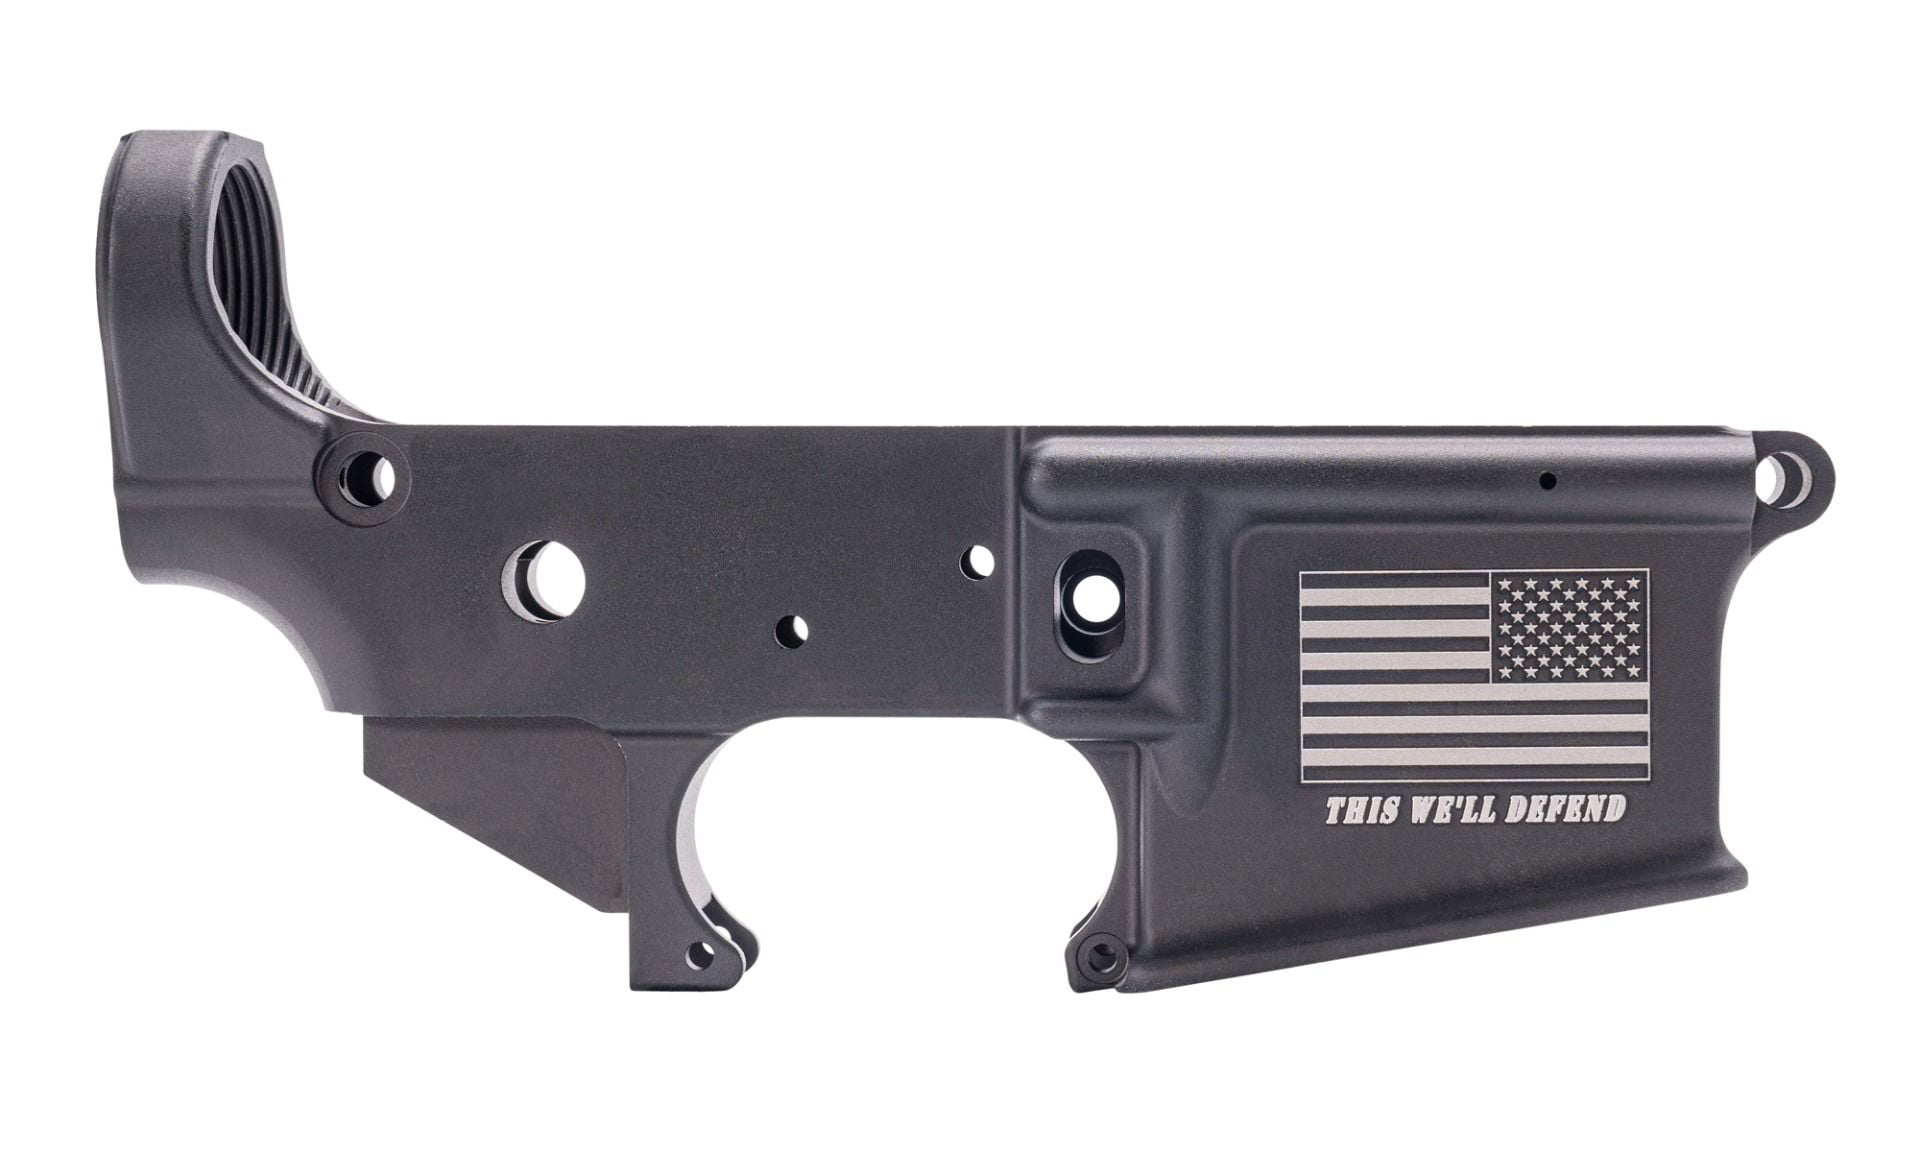 AM-15 STRIPPED LOWER RECEIVER - THIS WE'LL DEFEND - FLAG